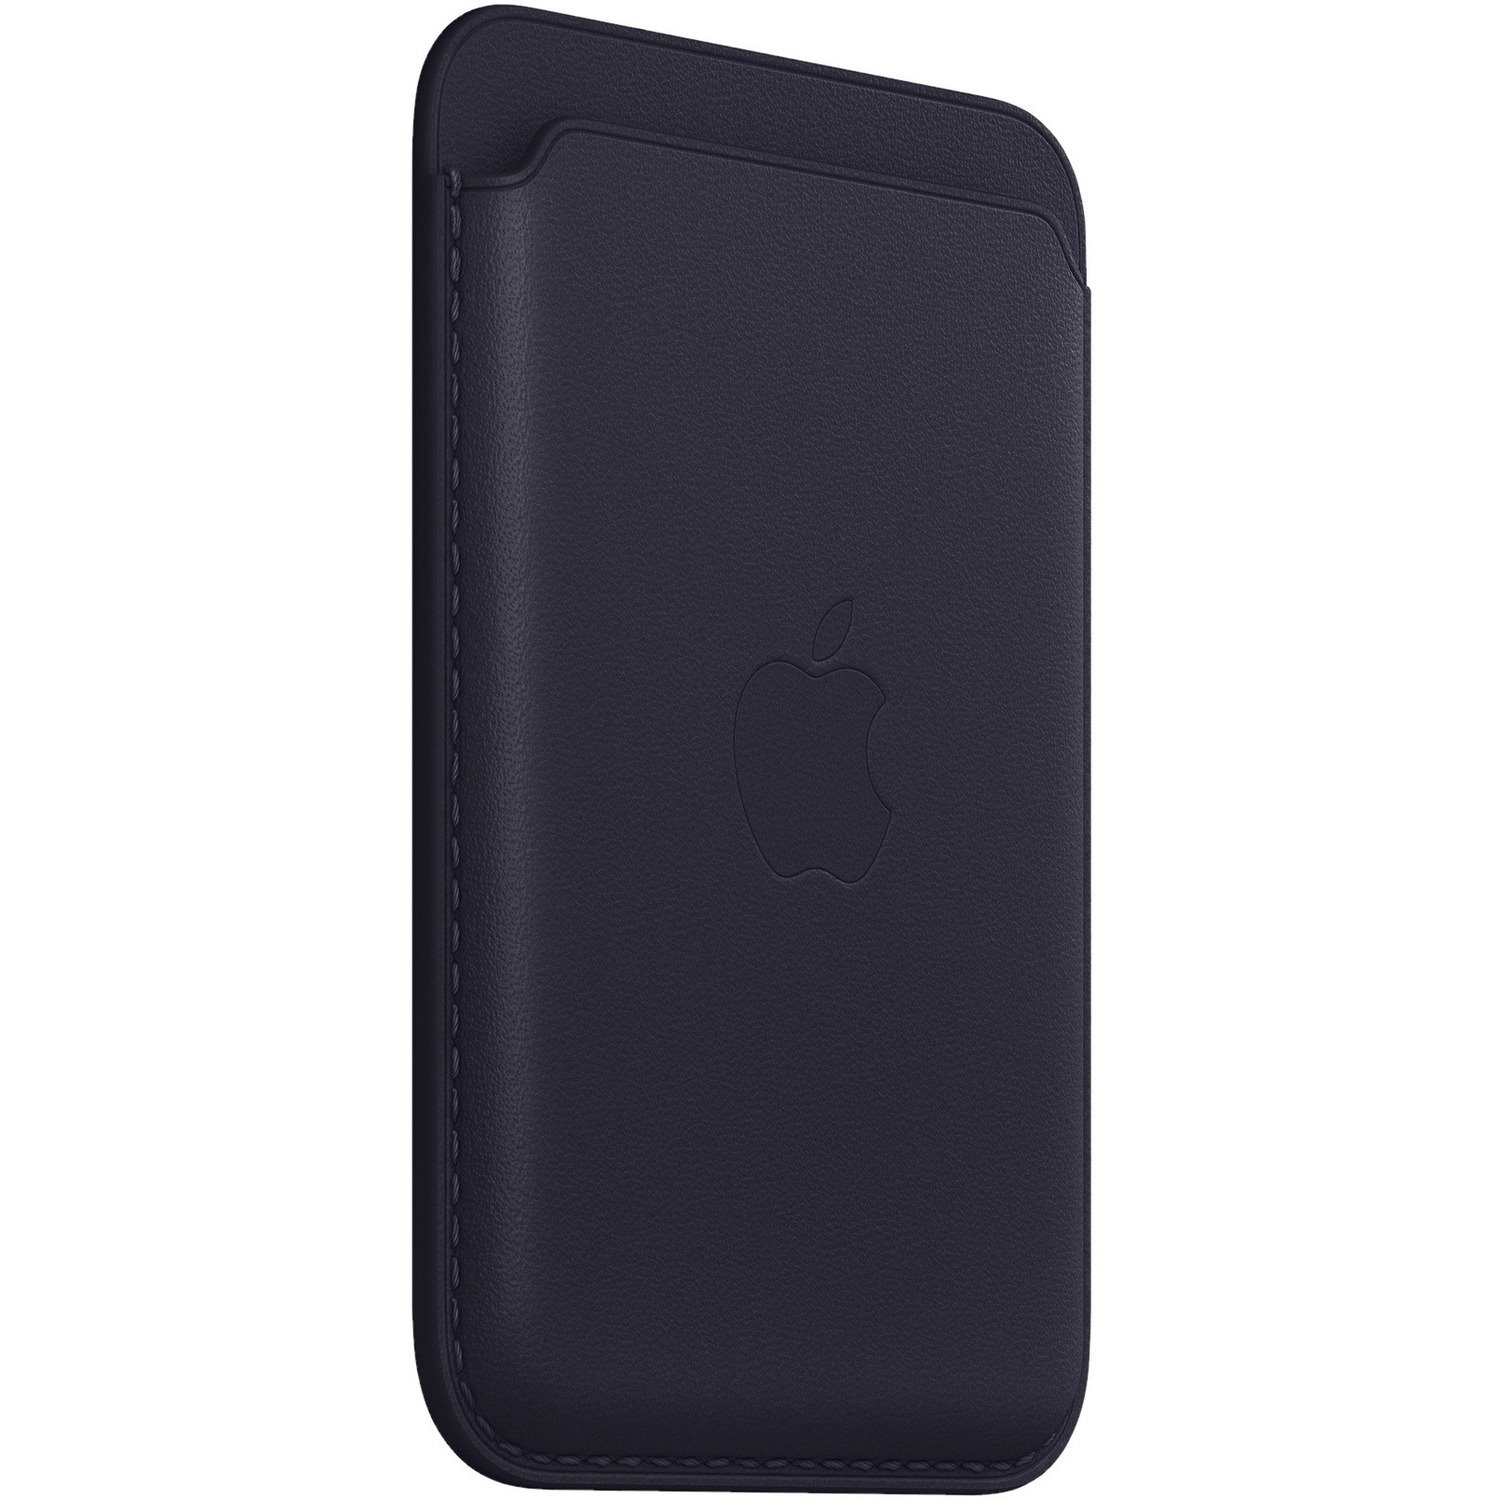 Apple Carrying Case (Wallet) Apple iPhone 14 Pro, iPhone 14 Pro Max, iPhone 14 Plus, iPhone 14, iPhone 13 mini, iPhone 13 Pro, iPhone 13 Pro Max, iPhone 13, iPhone 12 mini, iPhone 12 Pro, iPhone 12, ... Smartphone - Ink